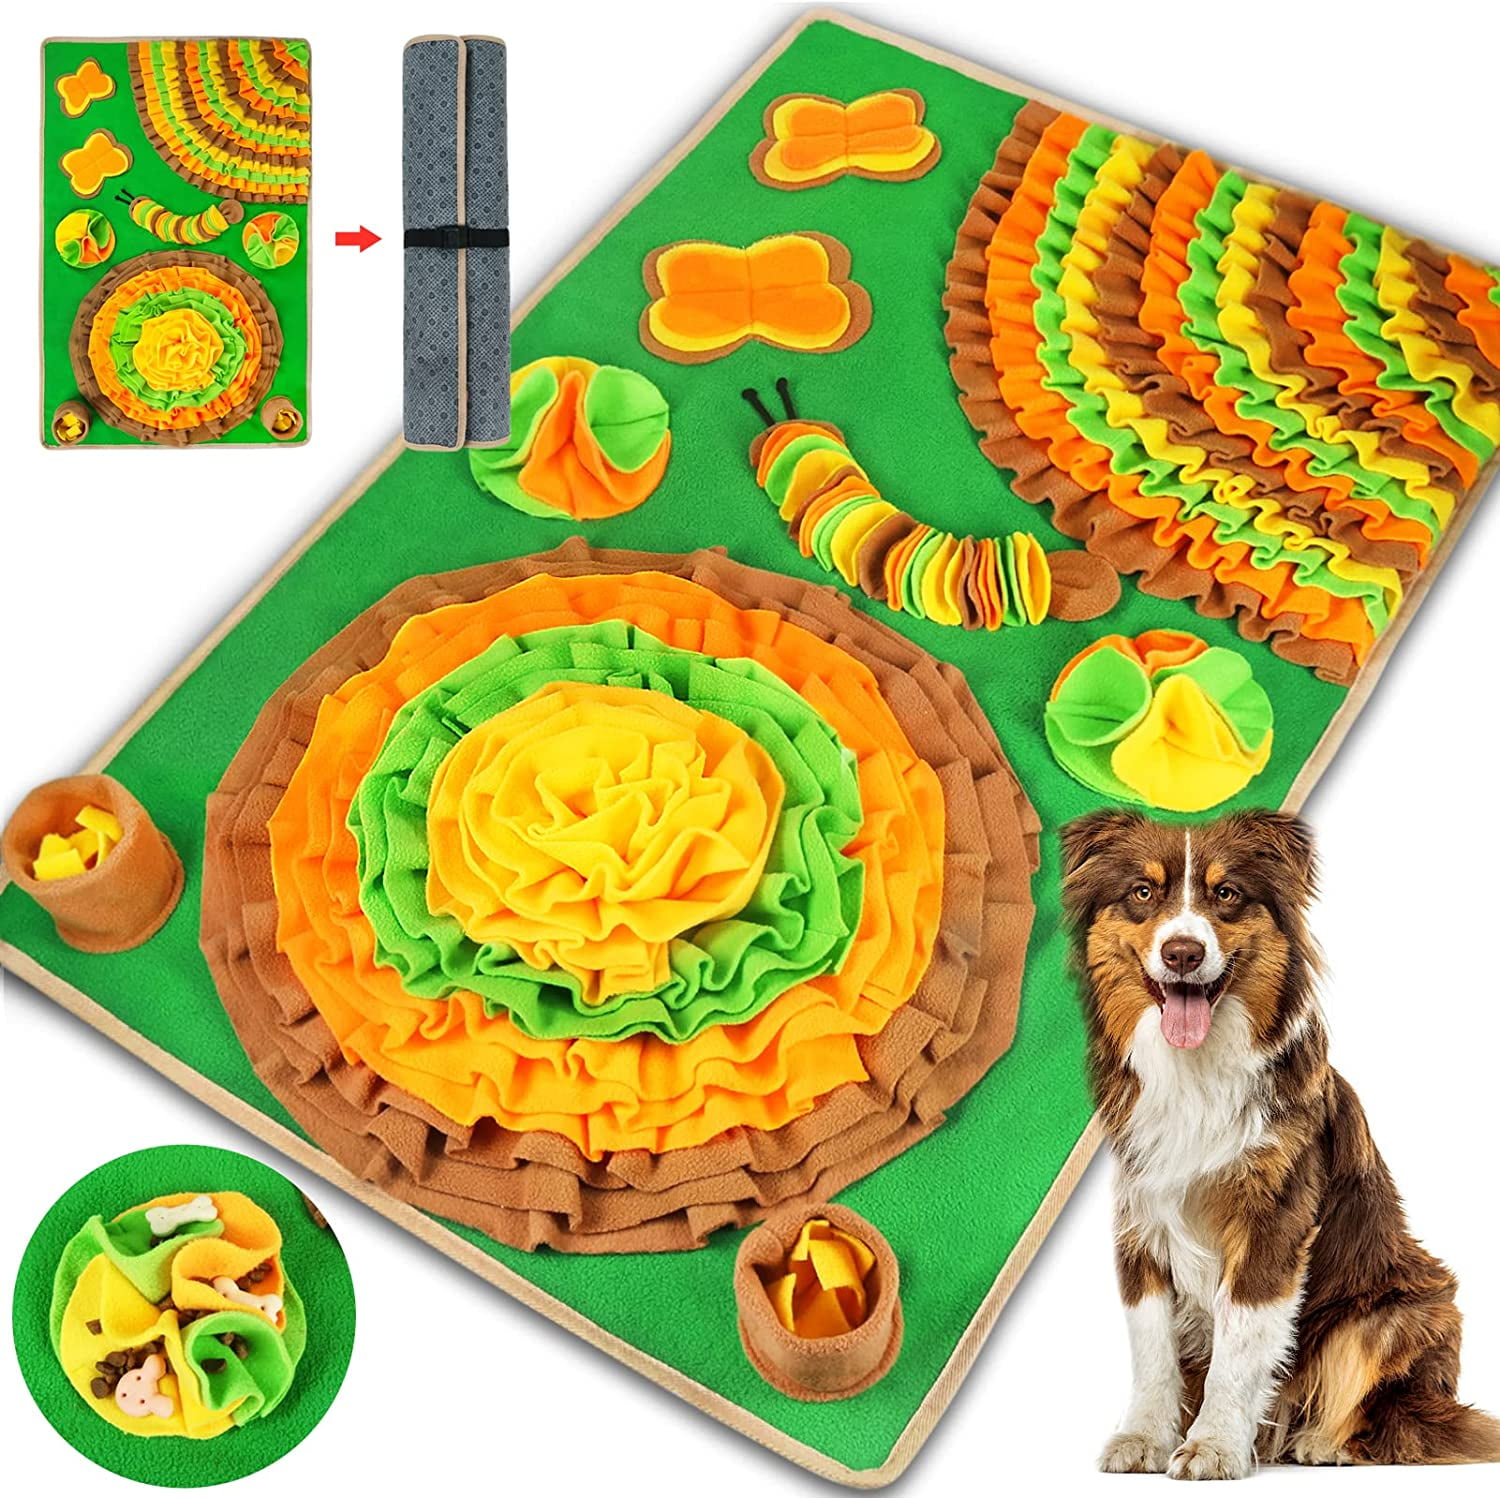 Our K9 Training Made Easy Snuffle Mat for Dogs - 3 Uses 1 Mat